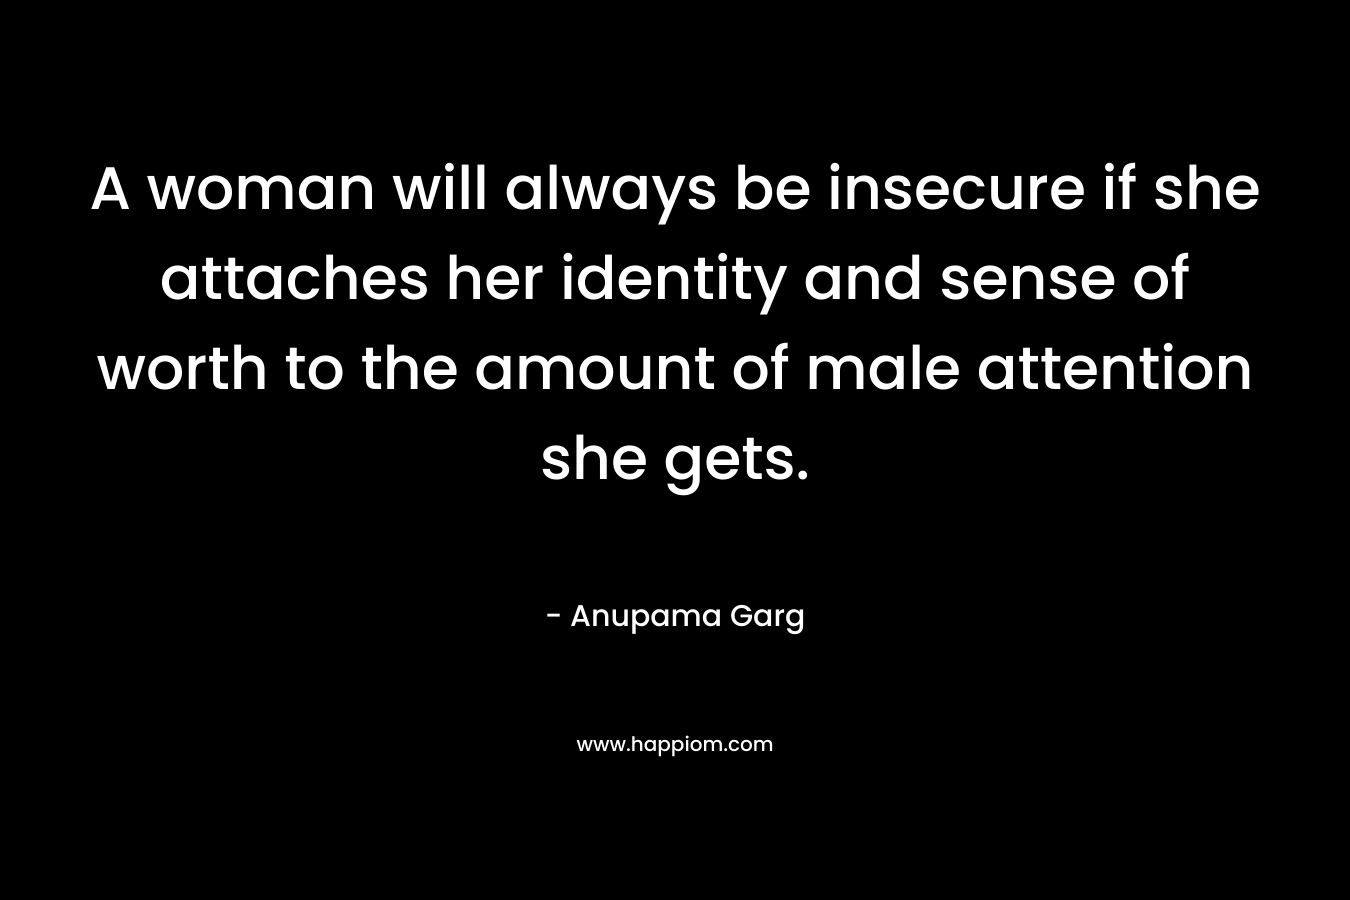 A woman will always be insecure if she attaches her identity and sense of worth to the amount of male attention she gets.